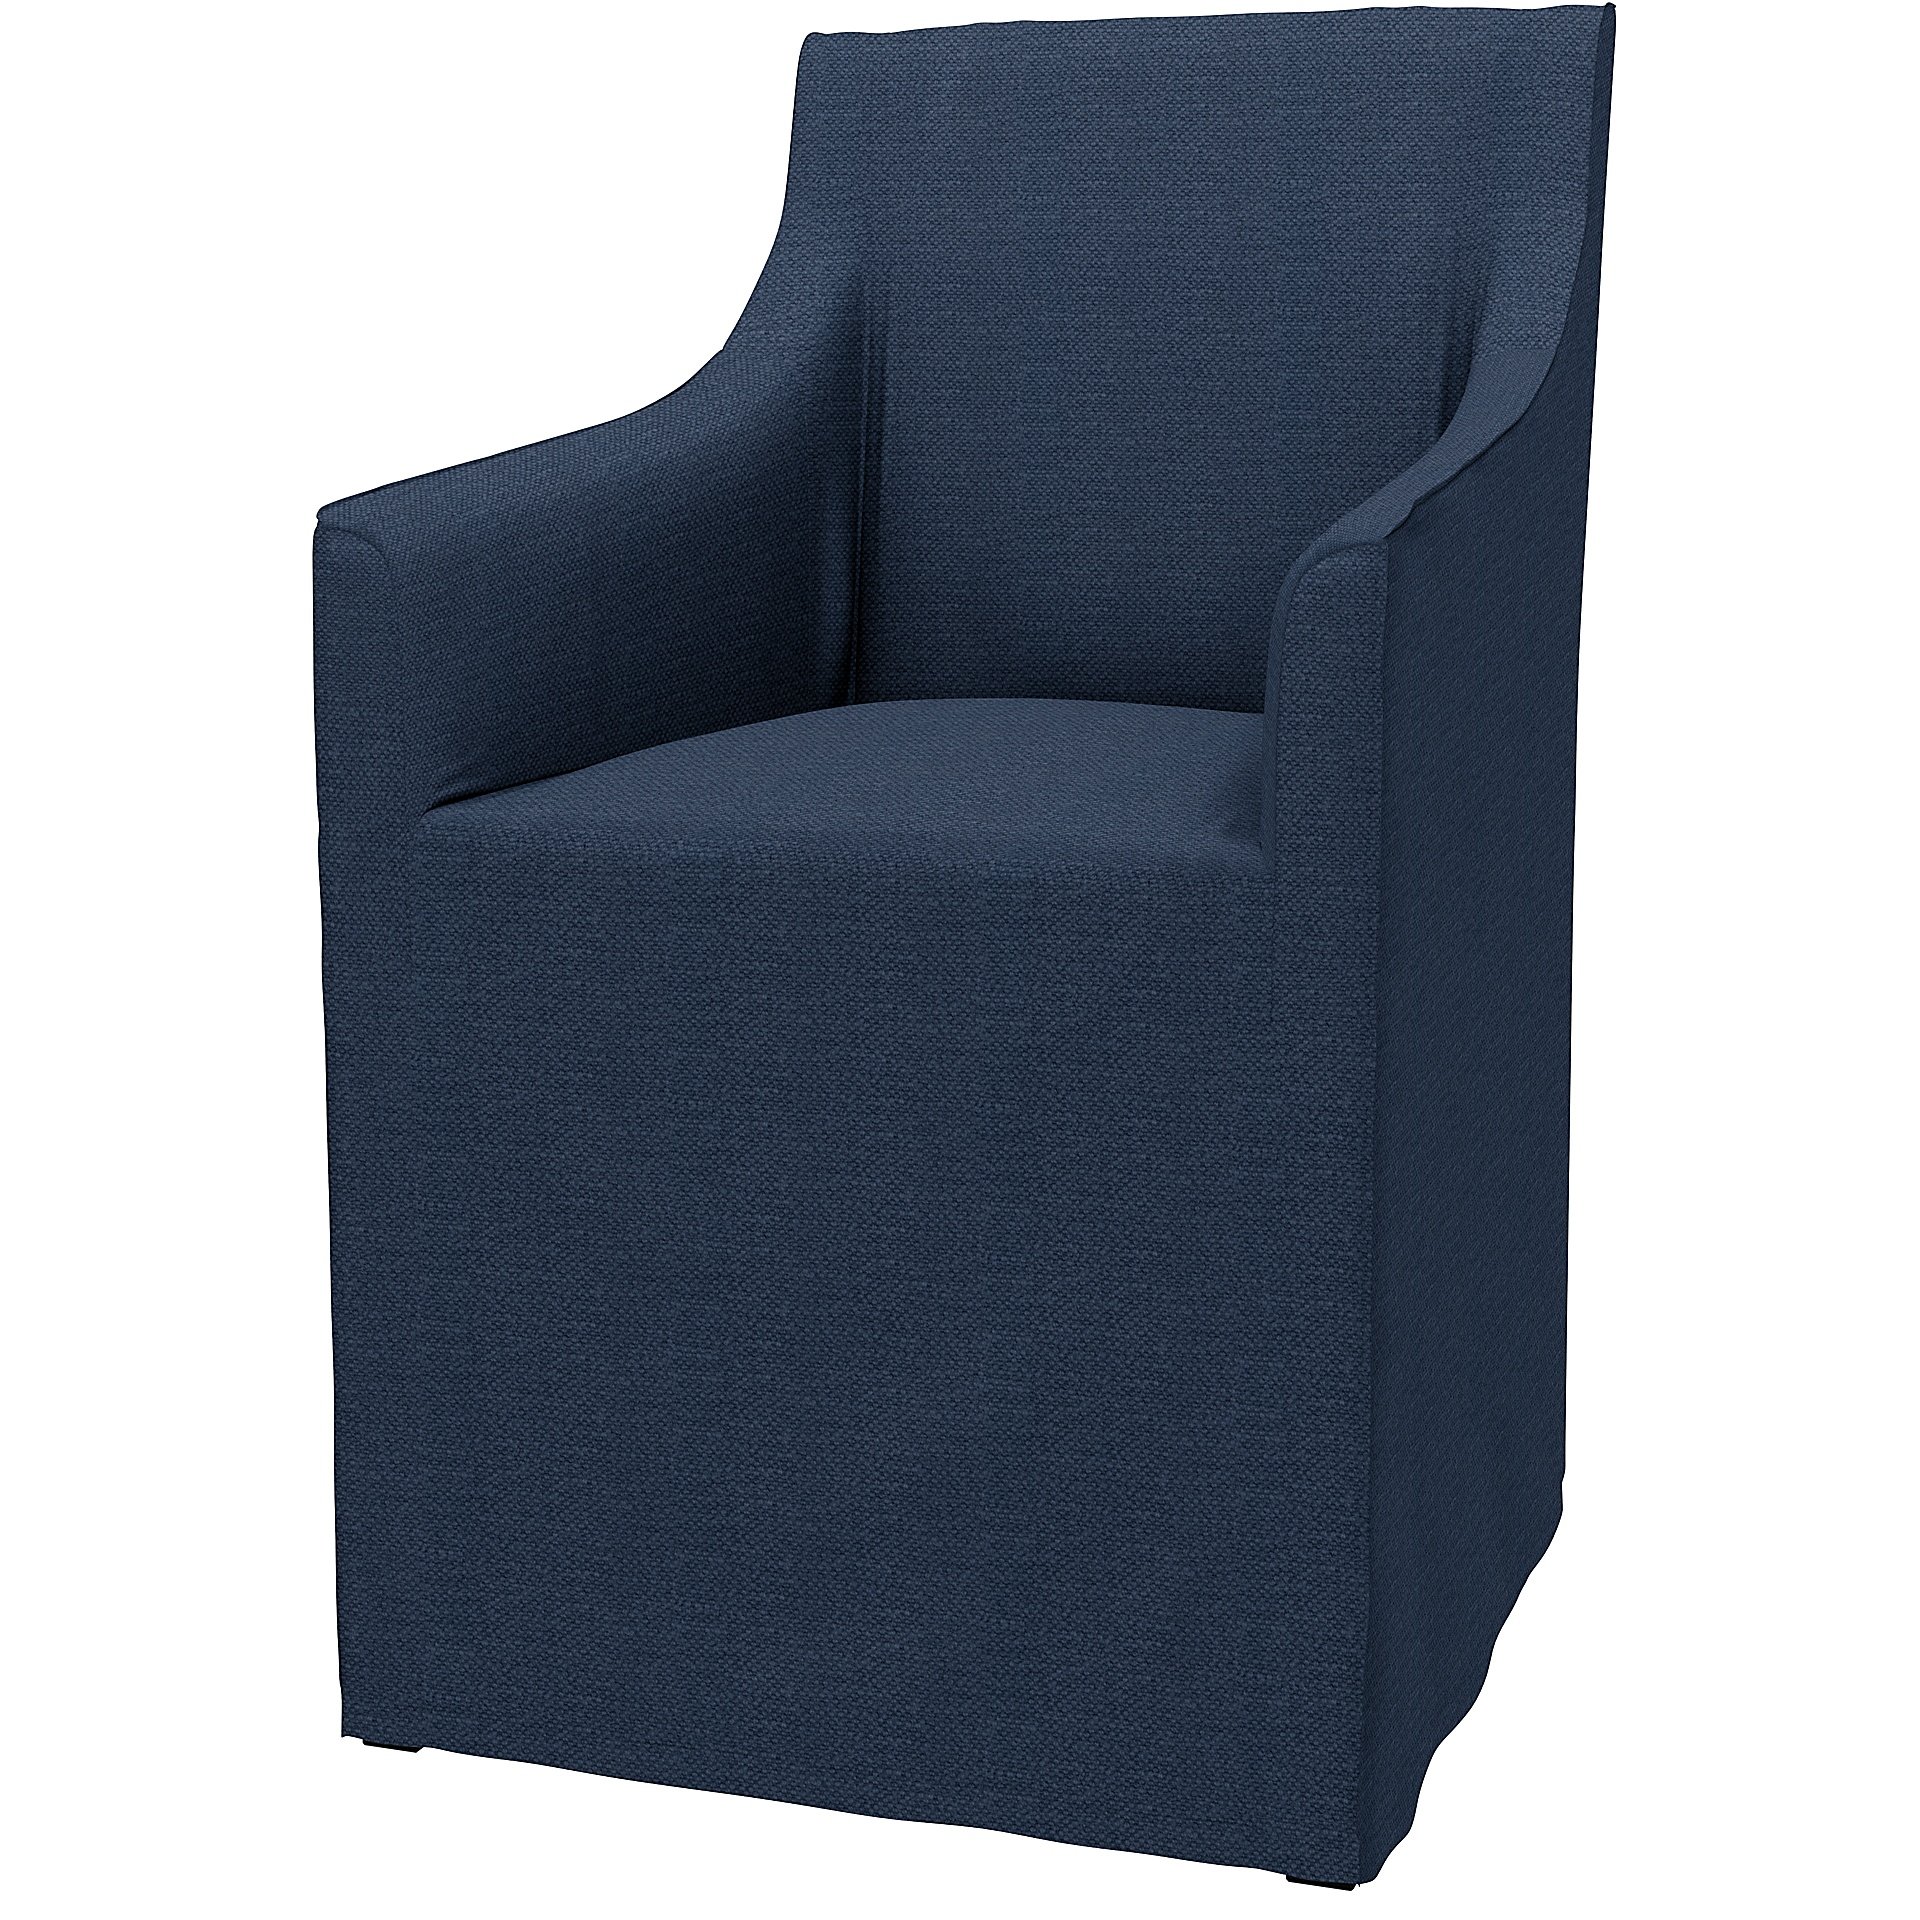 IKEA - Sakarias Chair with Armrests Cover, Navy Blue, Linen - Bemz